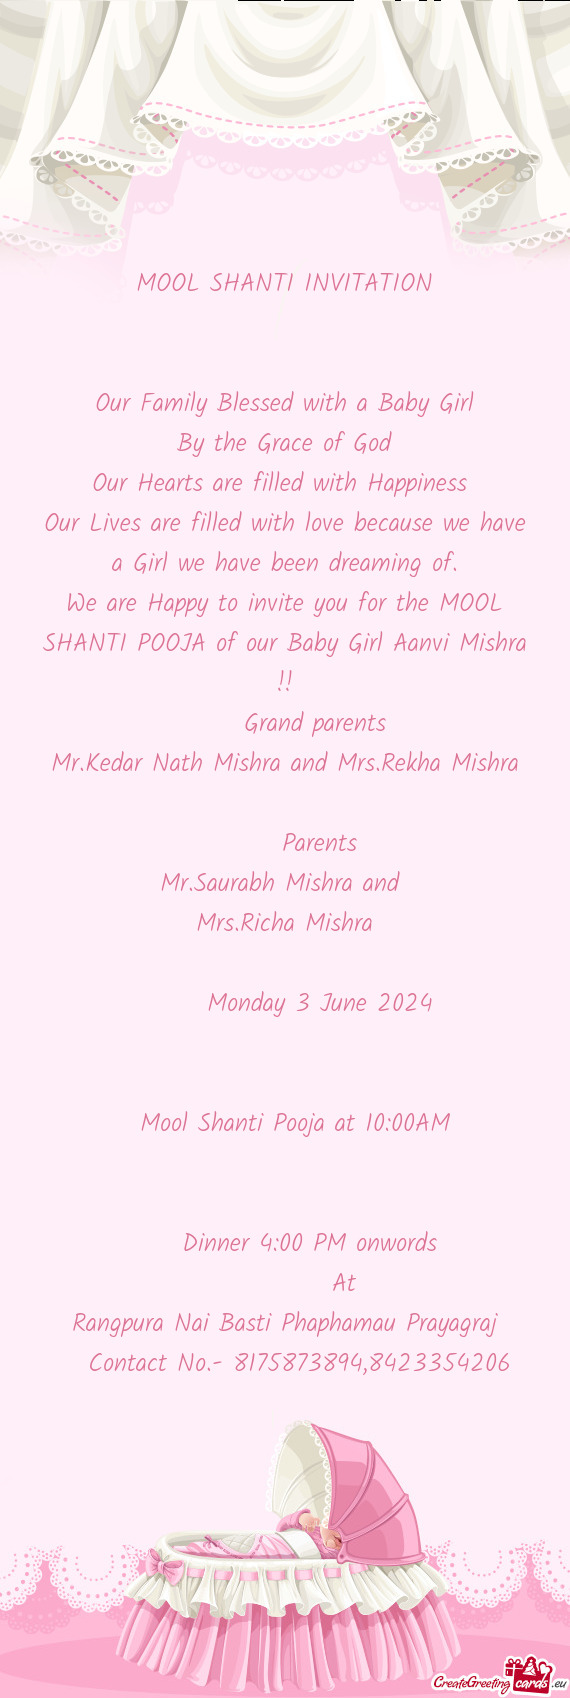 We are Happy to invite you for the MOOL SHANTI POOJA of our Baby Girl Aanvi Mishra